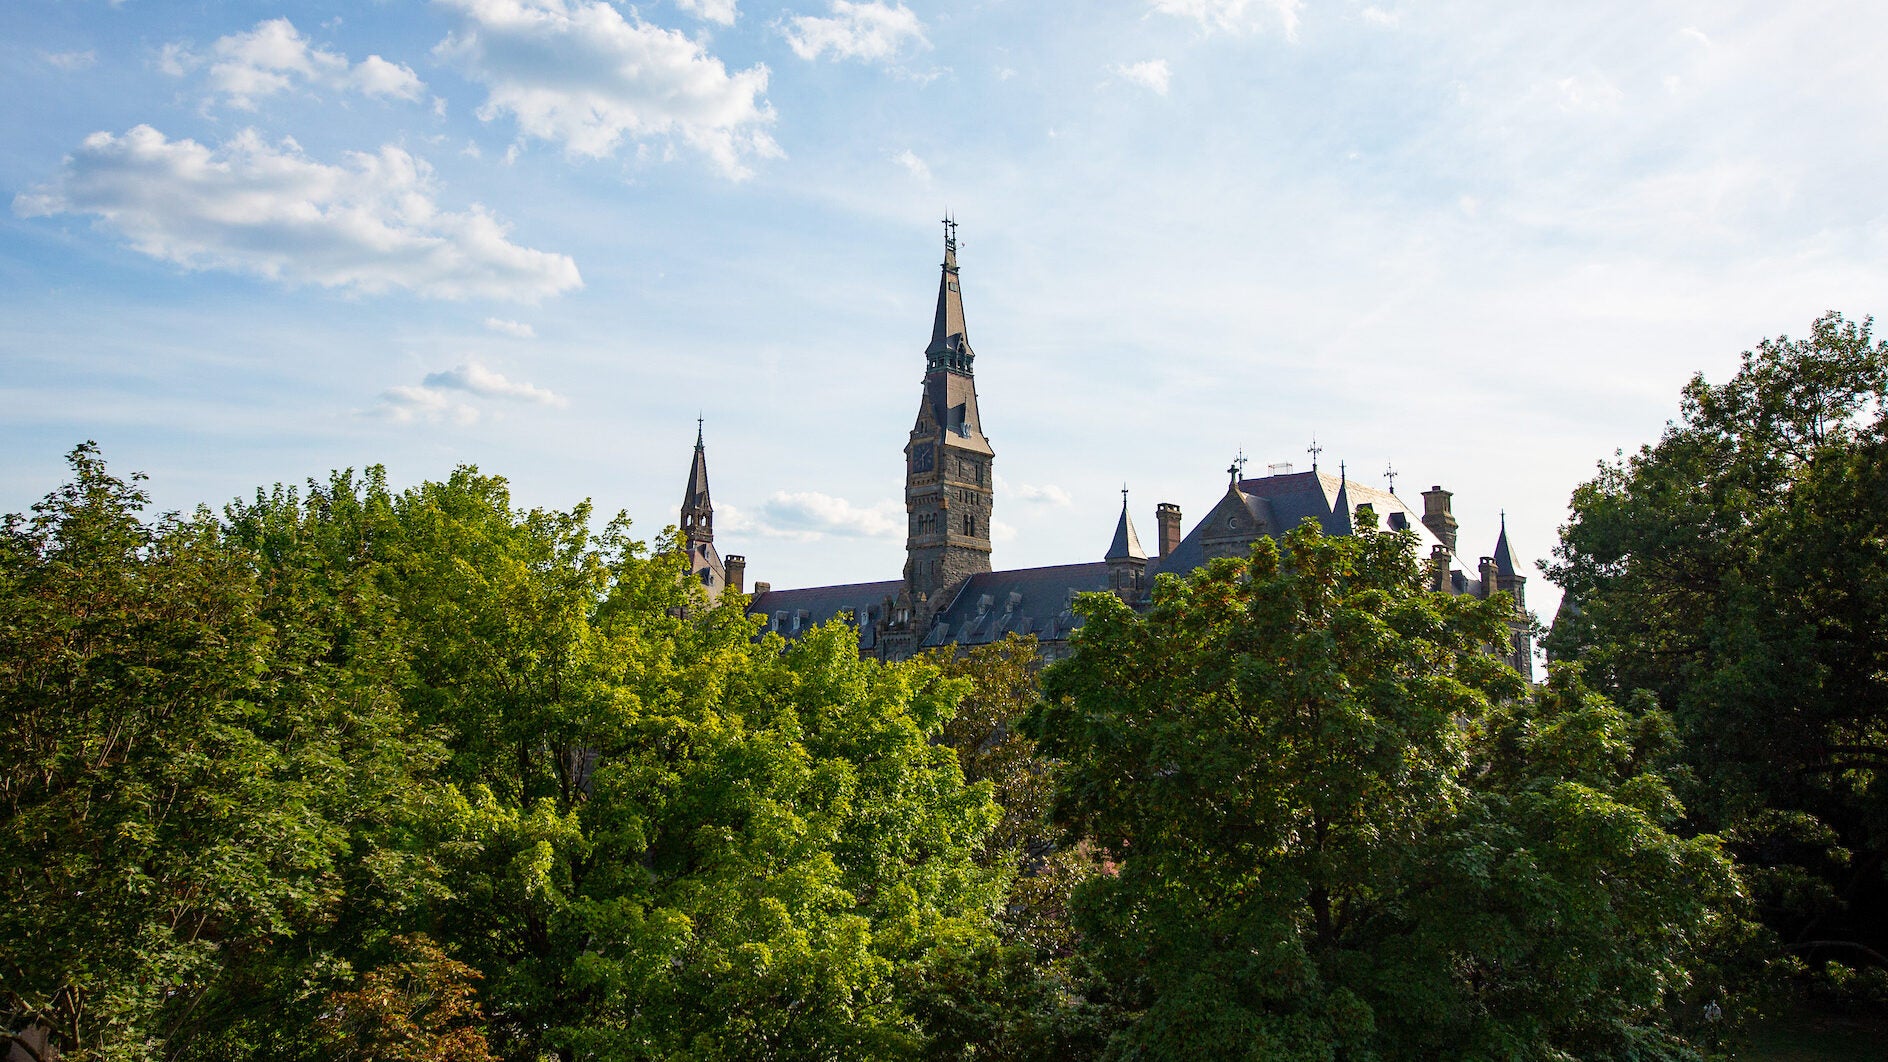 Healy Hall from afar through the green trees